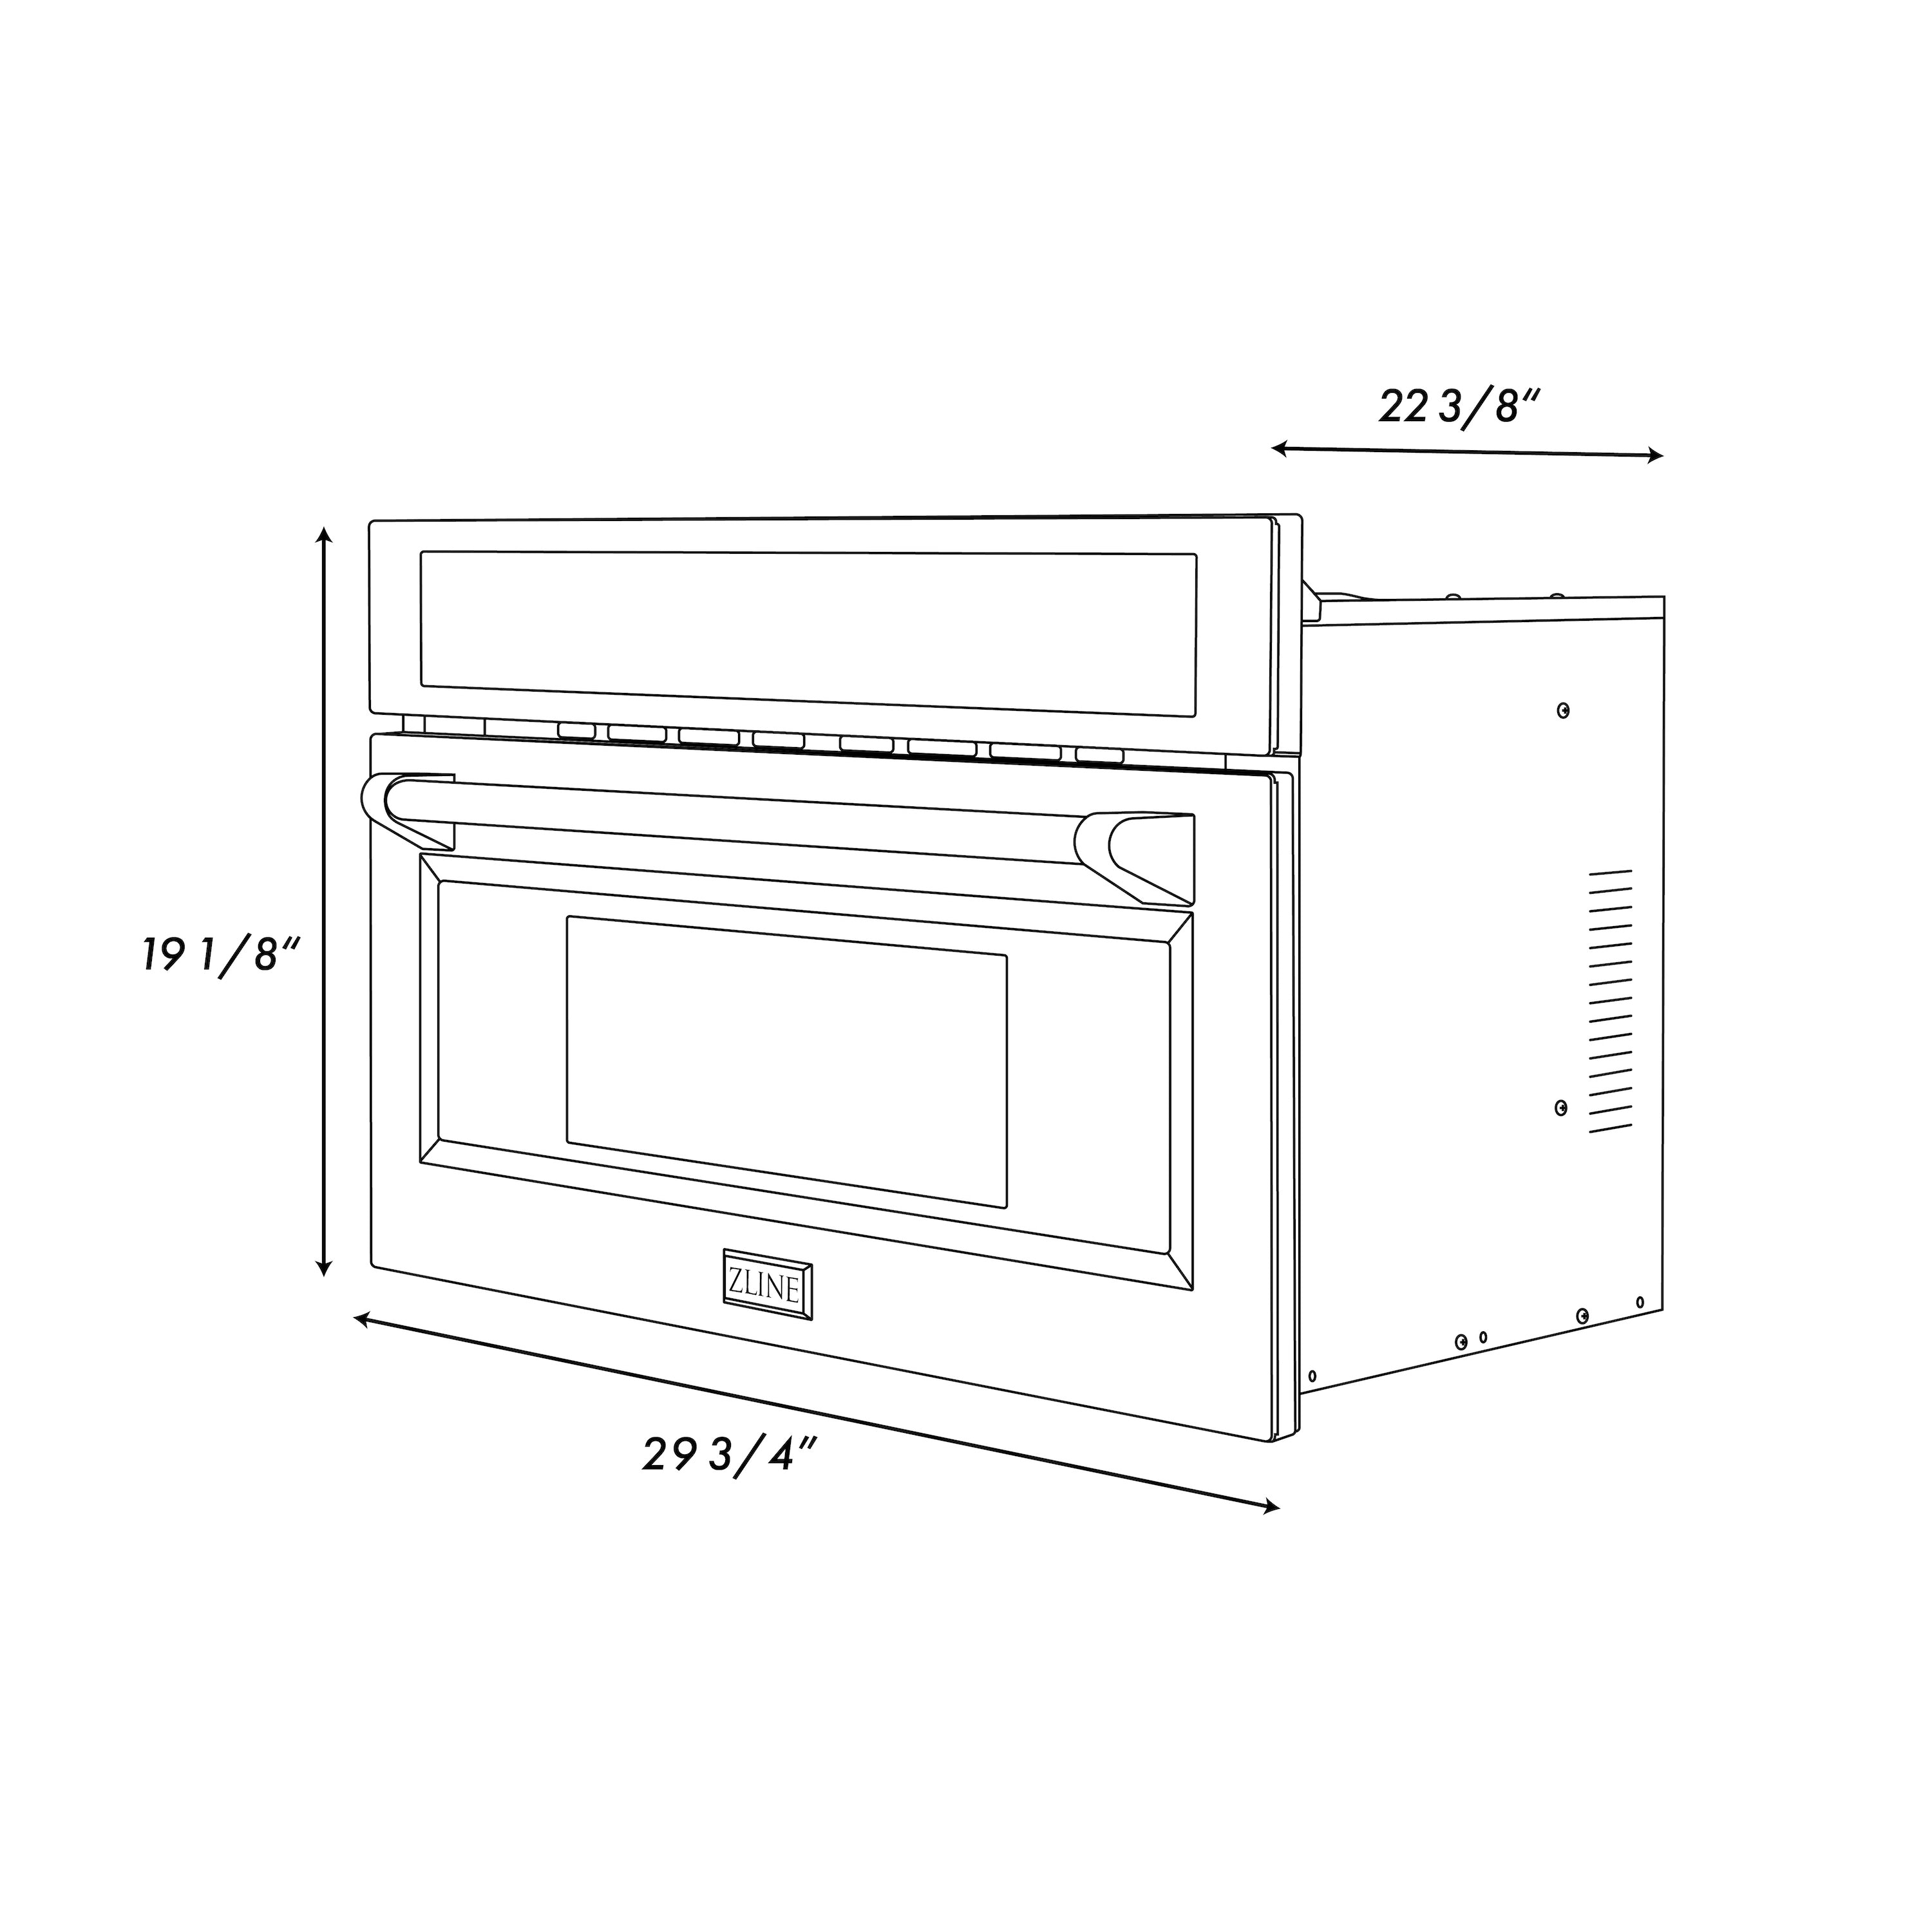 ZLINE Autograph Edition 30 in. 1.6 cu ft. Built-in Convection Microwave Oven (MWOZ-30-CB) Dimensions.